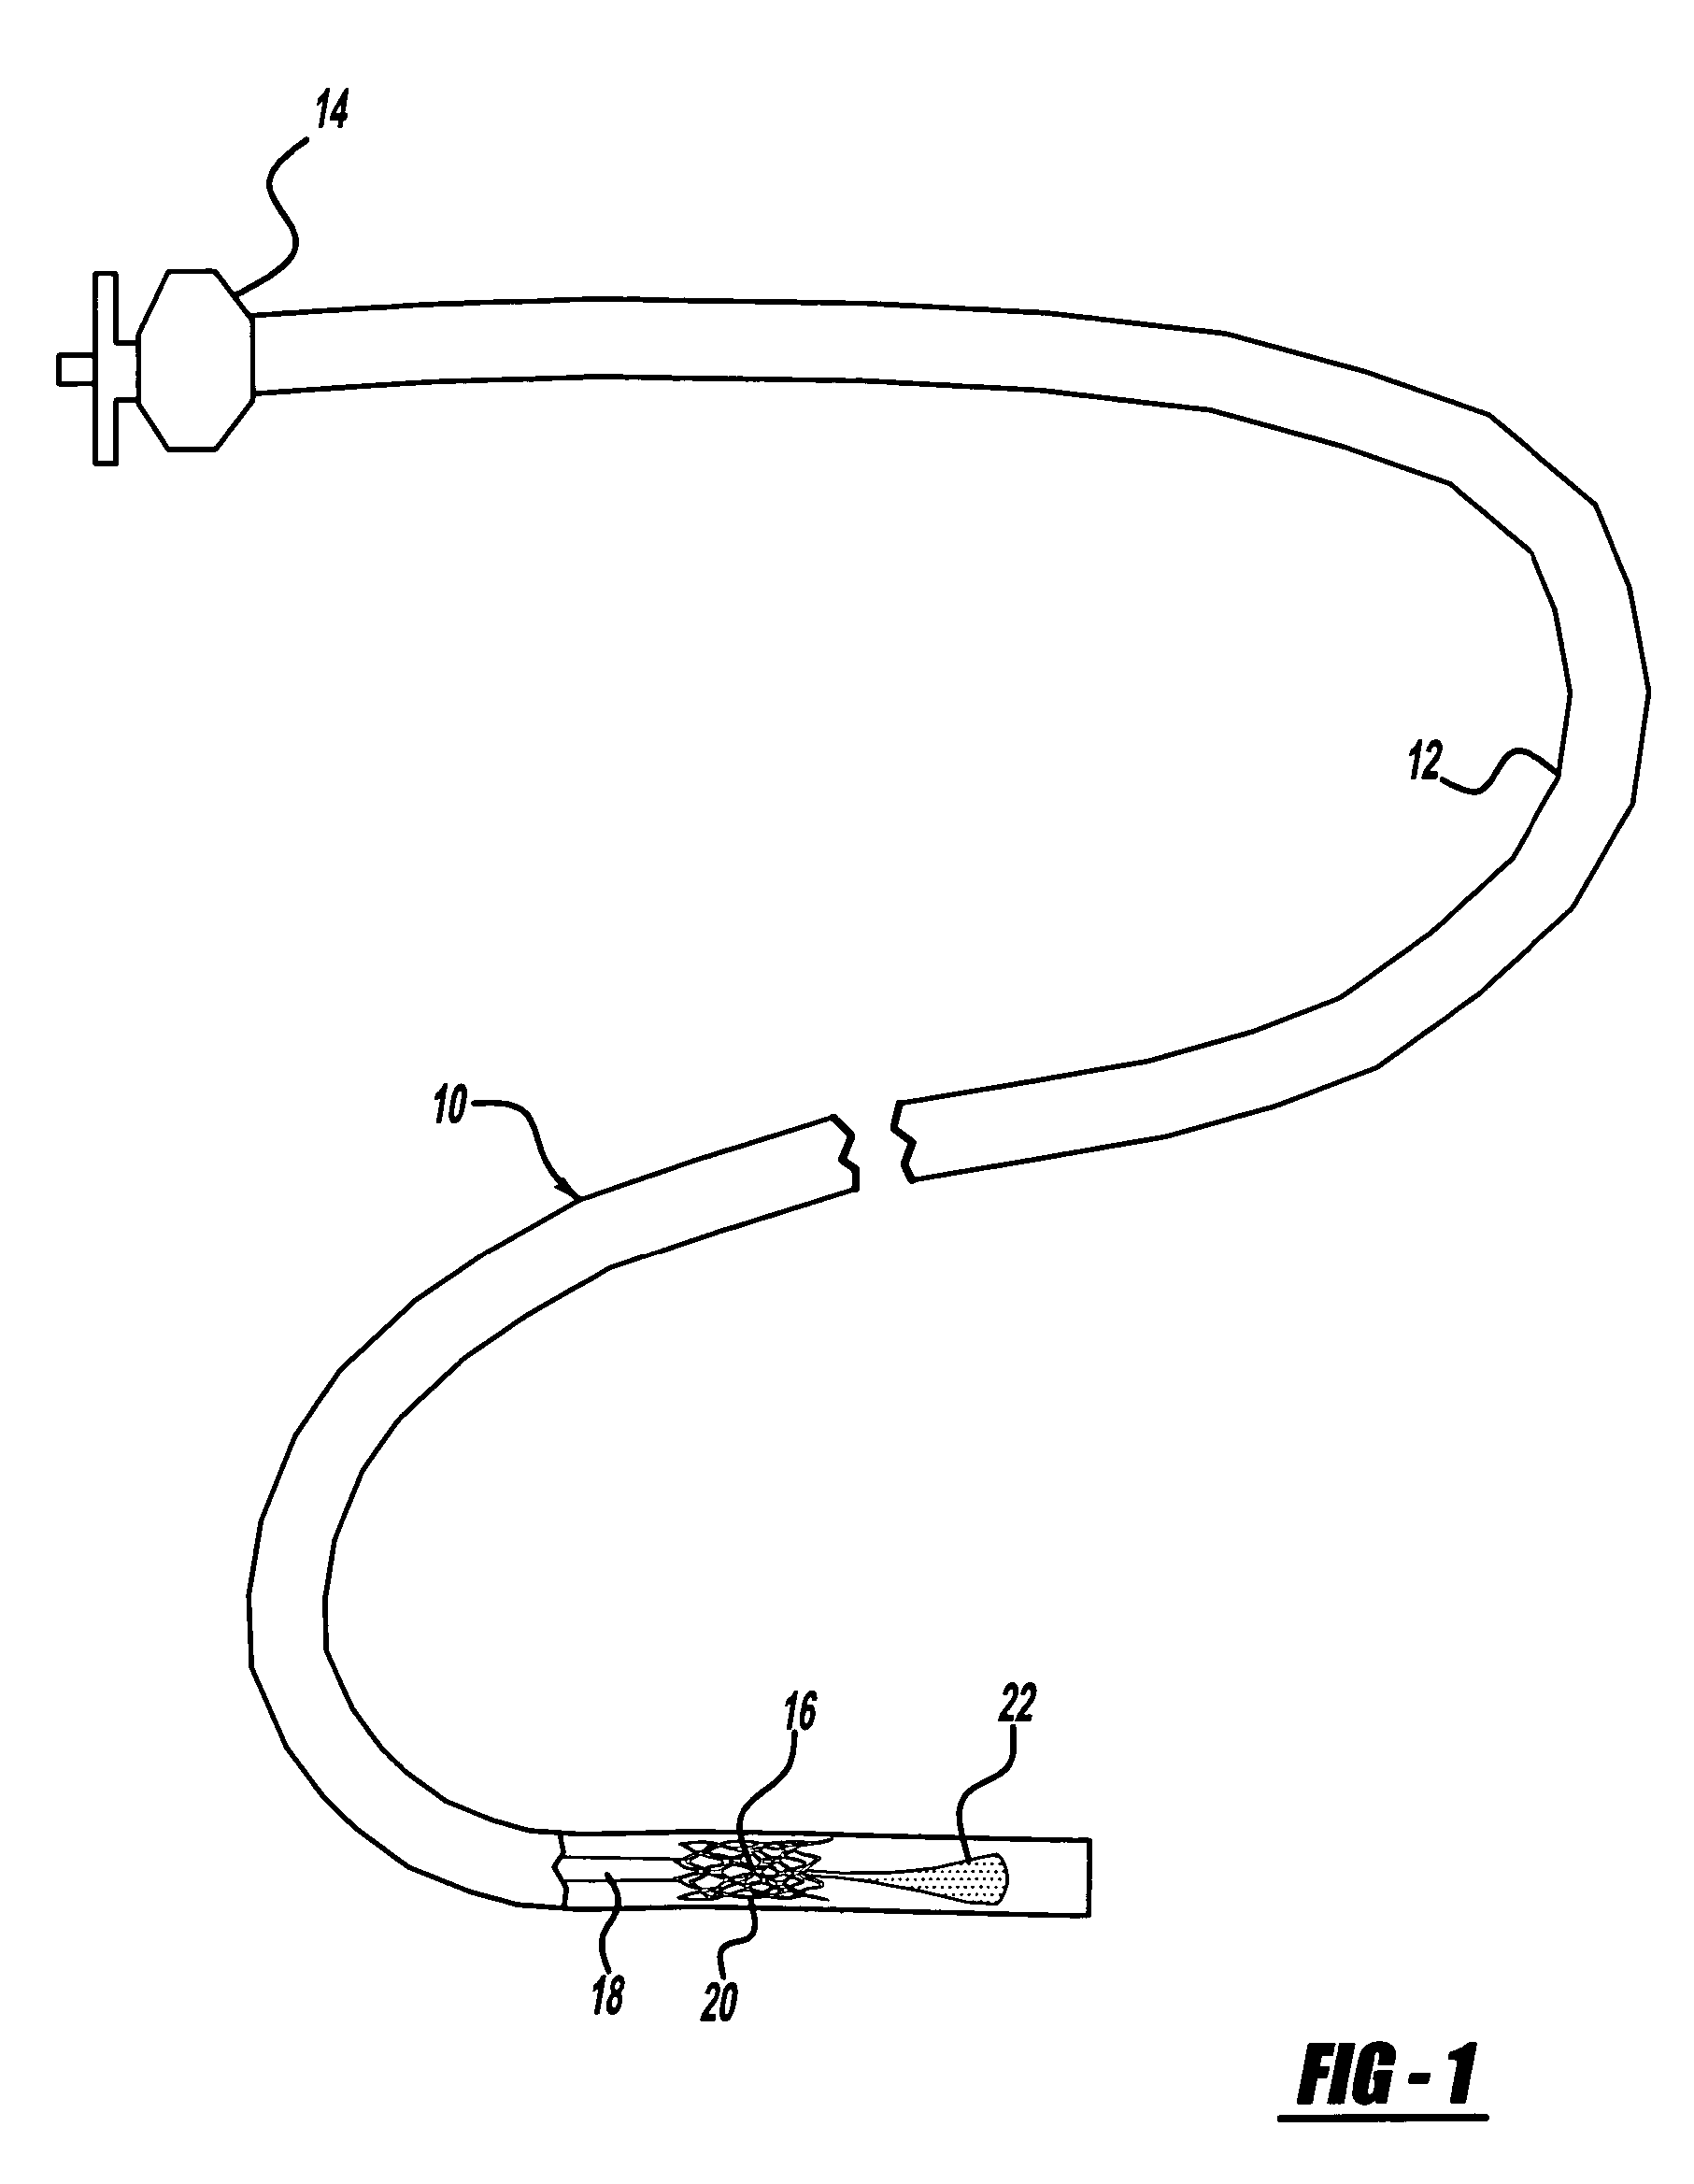 Neck covering device for an aneurysm